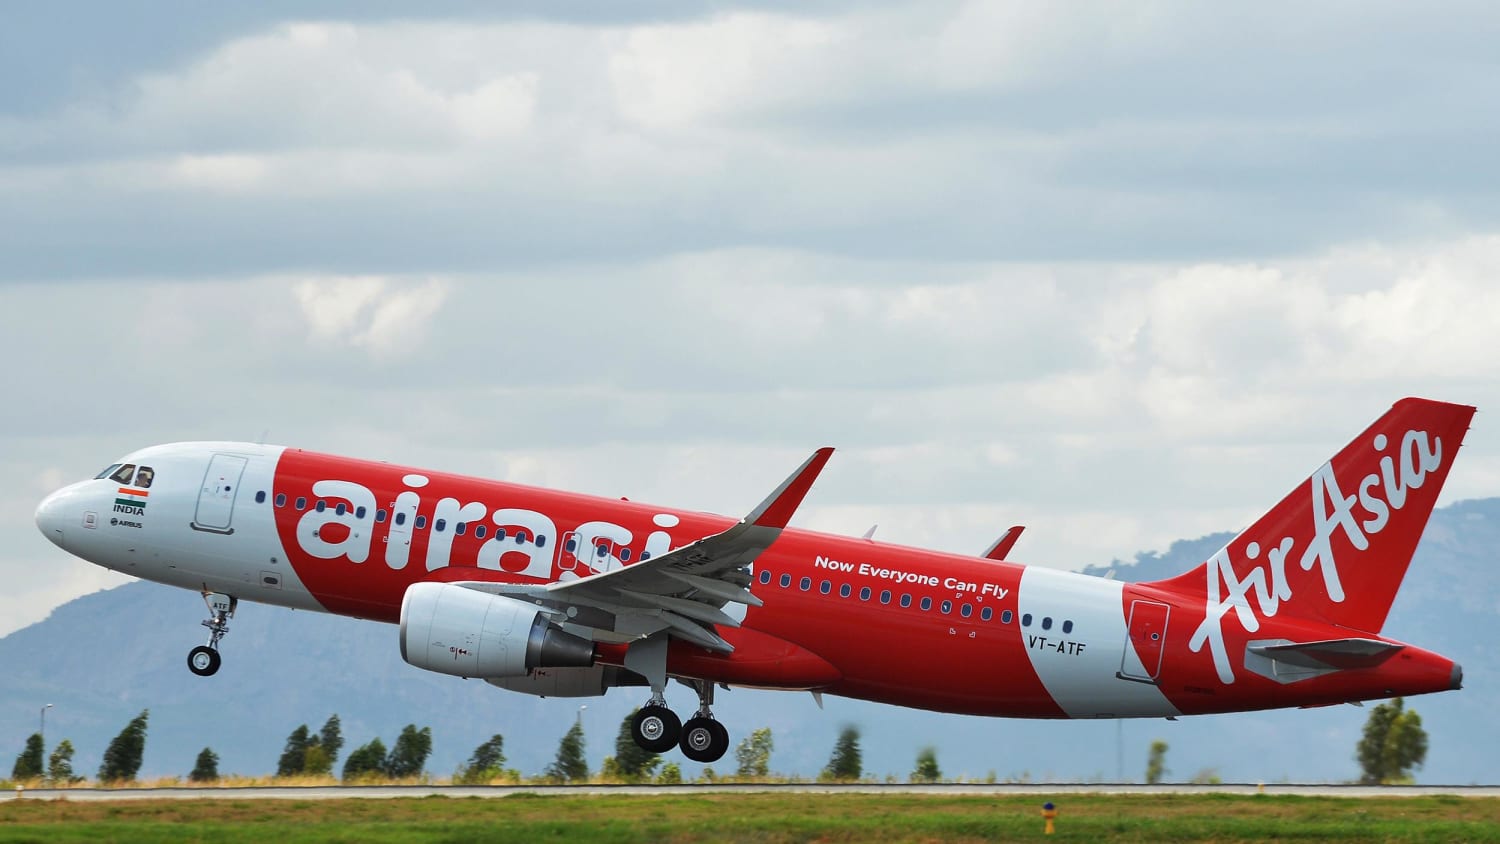 AirAsia Flight From Indonesia to Singapore Missing, Airline Says.